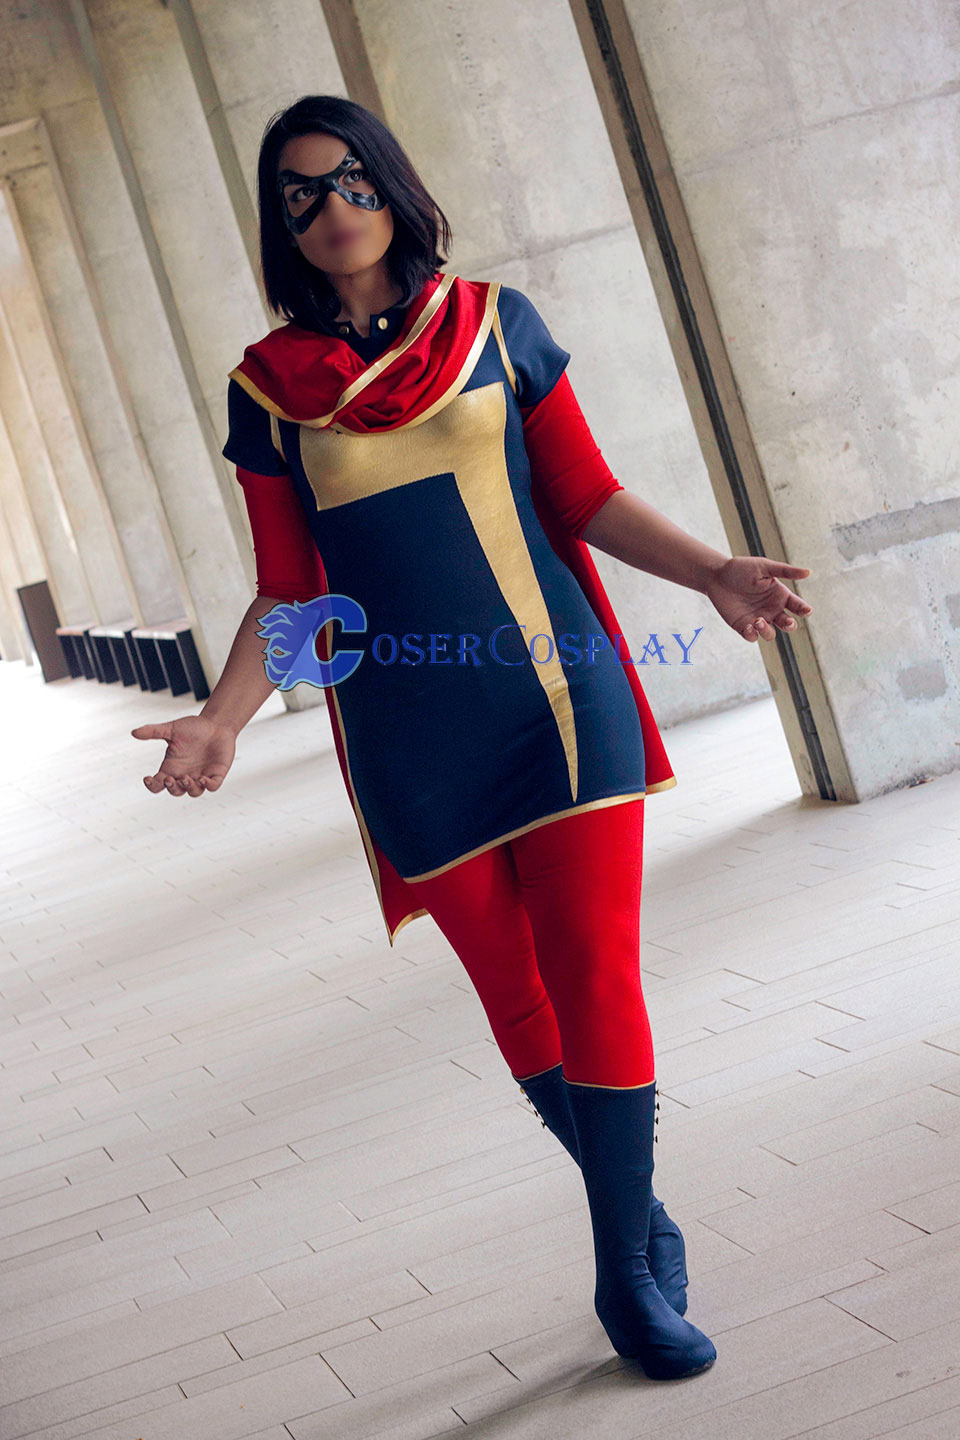 Adult sexy ms marvel cosplay